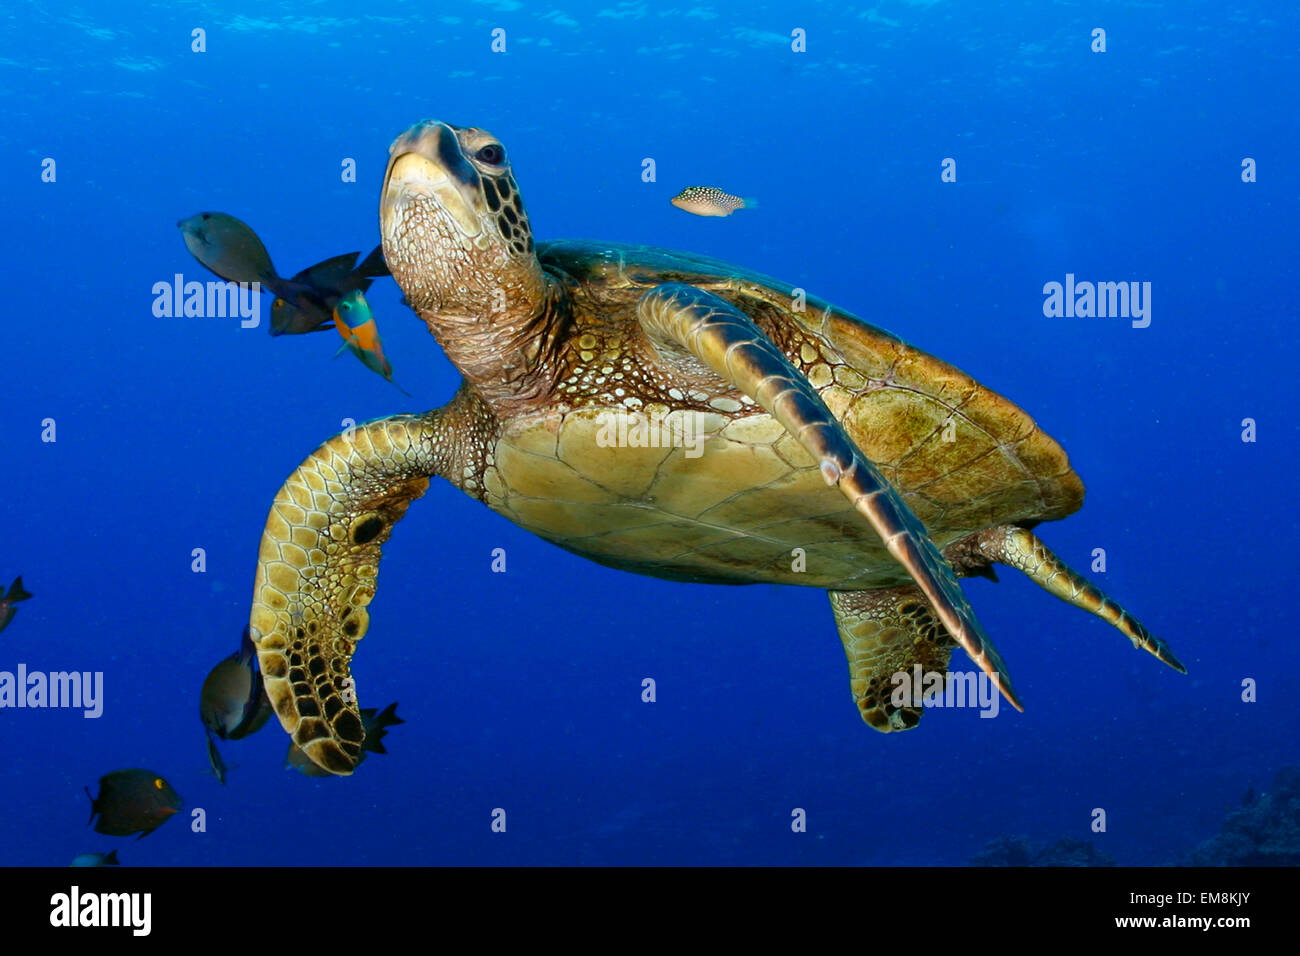 https://c8.alamy.com/comp/EM8KJY/hawaii-green-sea-turtle-cleaned-by-reef-fish-for-use-up-to-13x20-only-EM8KJY.jpg